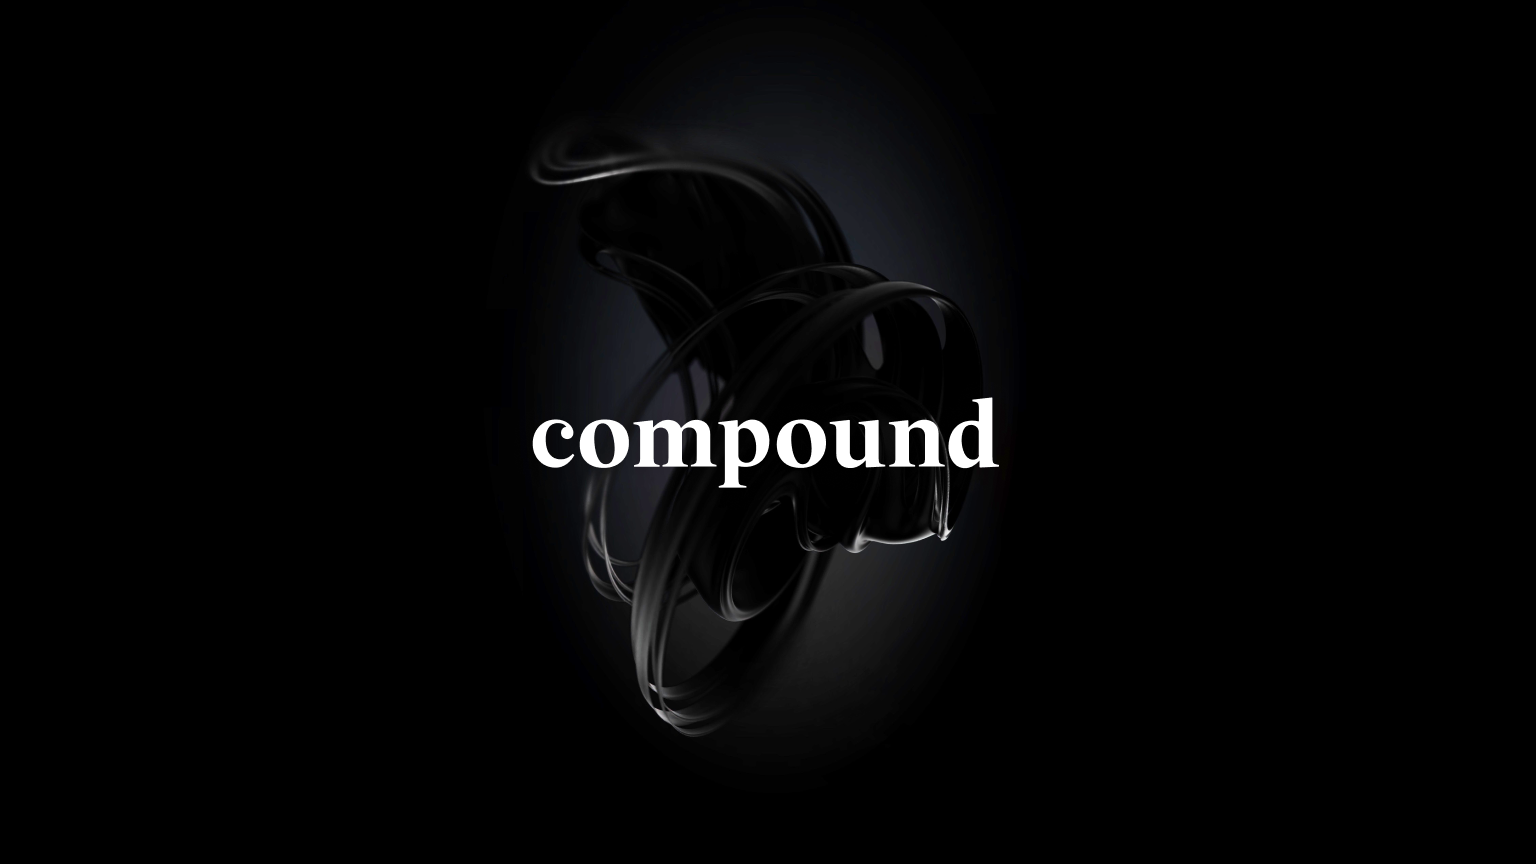 Compound (YC S19) is hiring to build financial products for startup employees